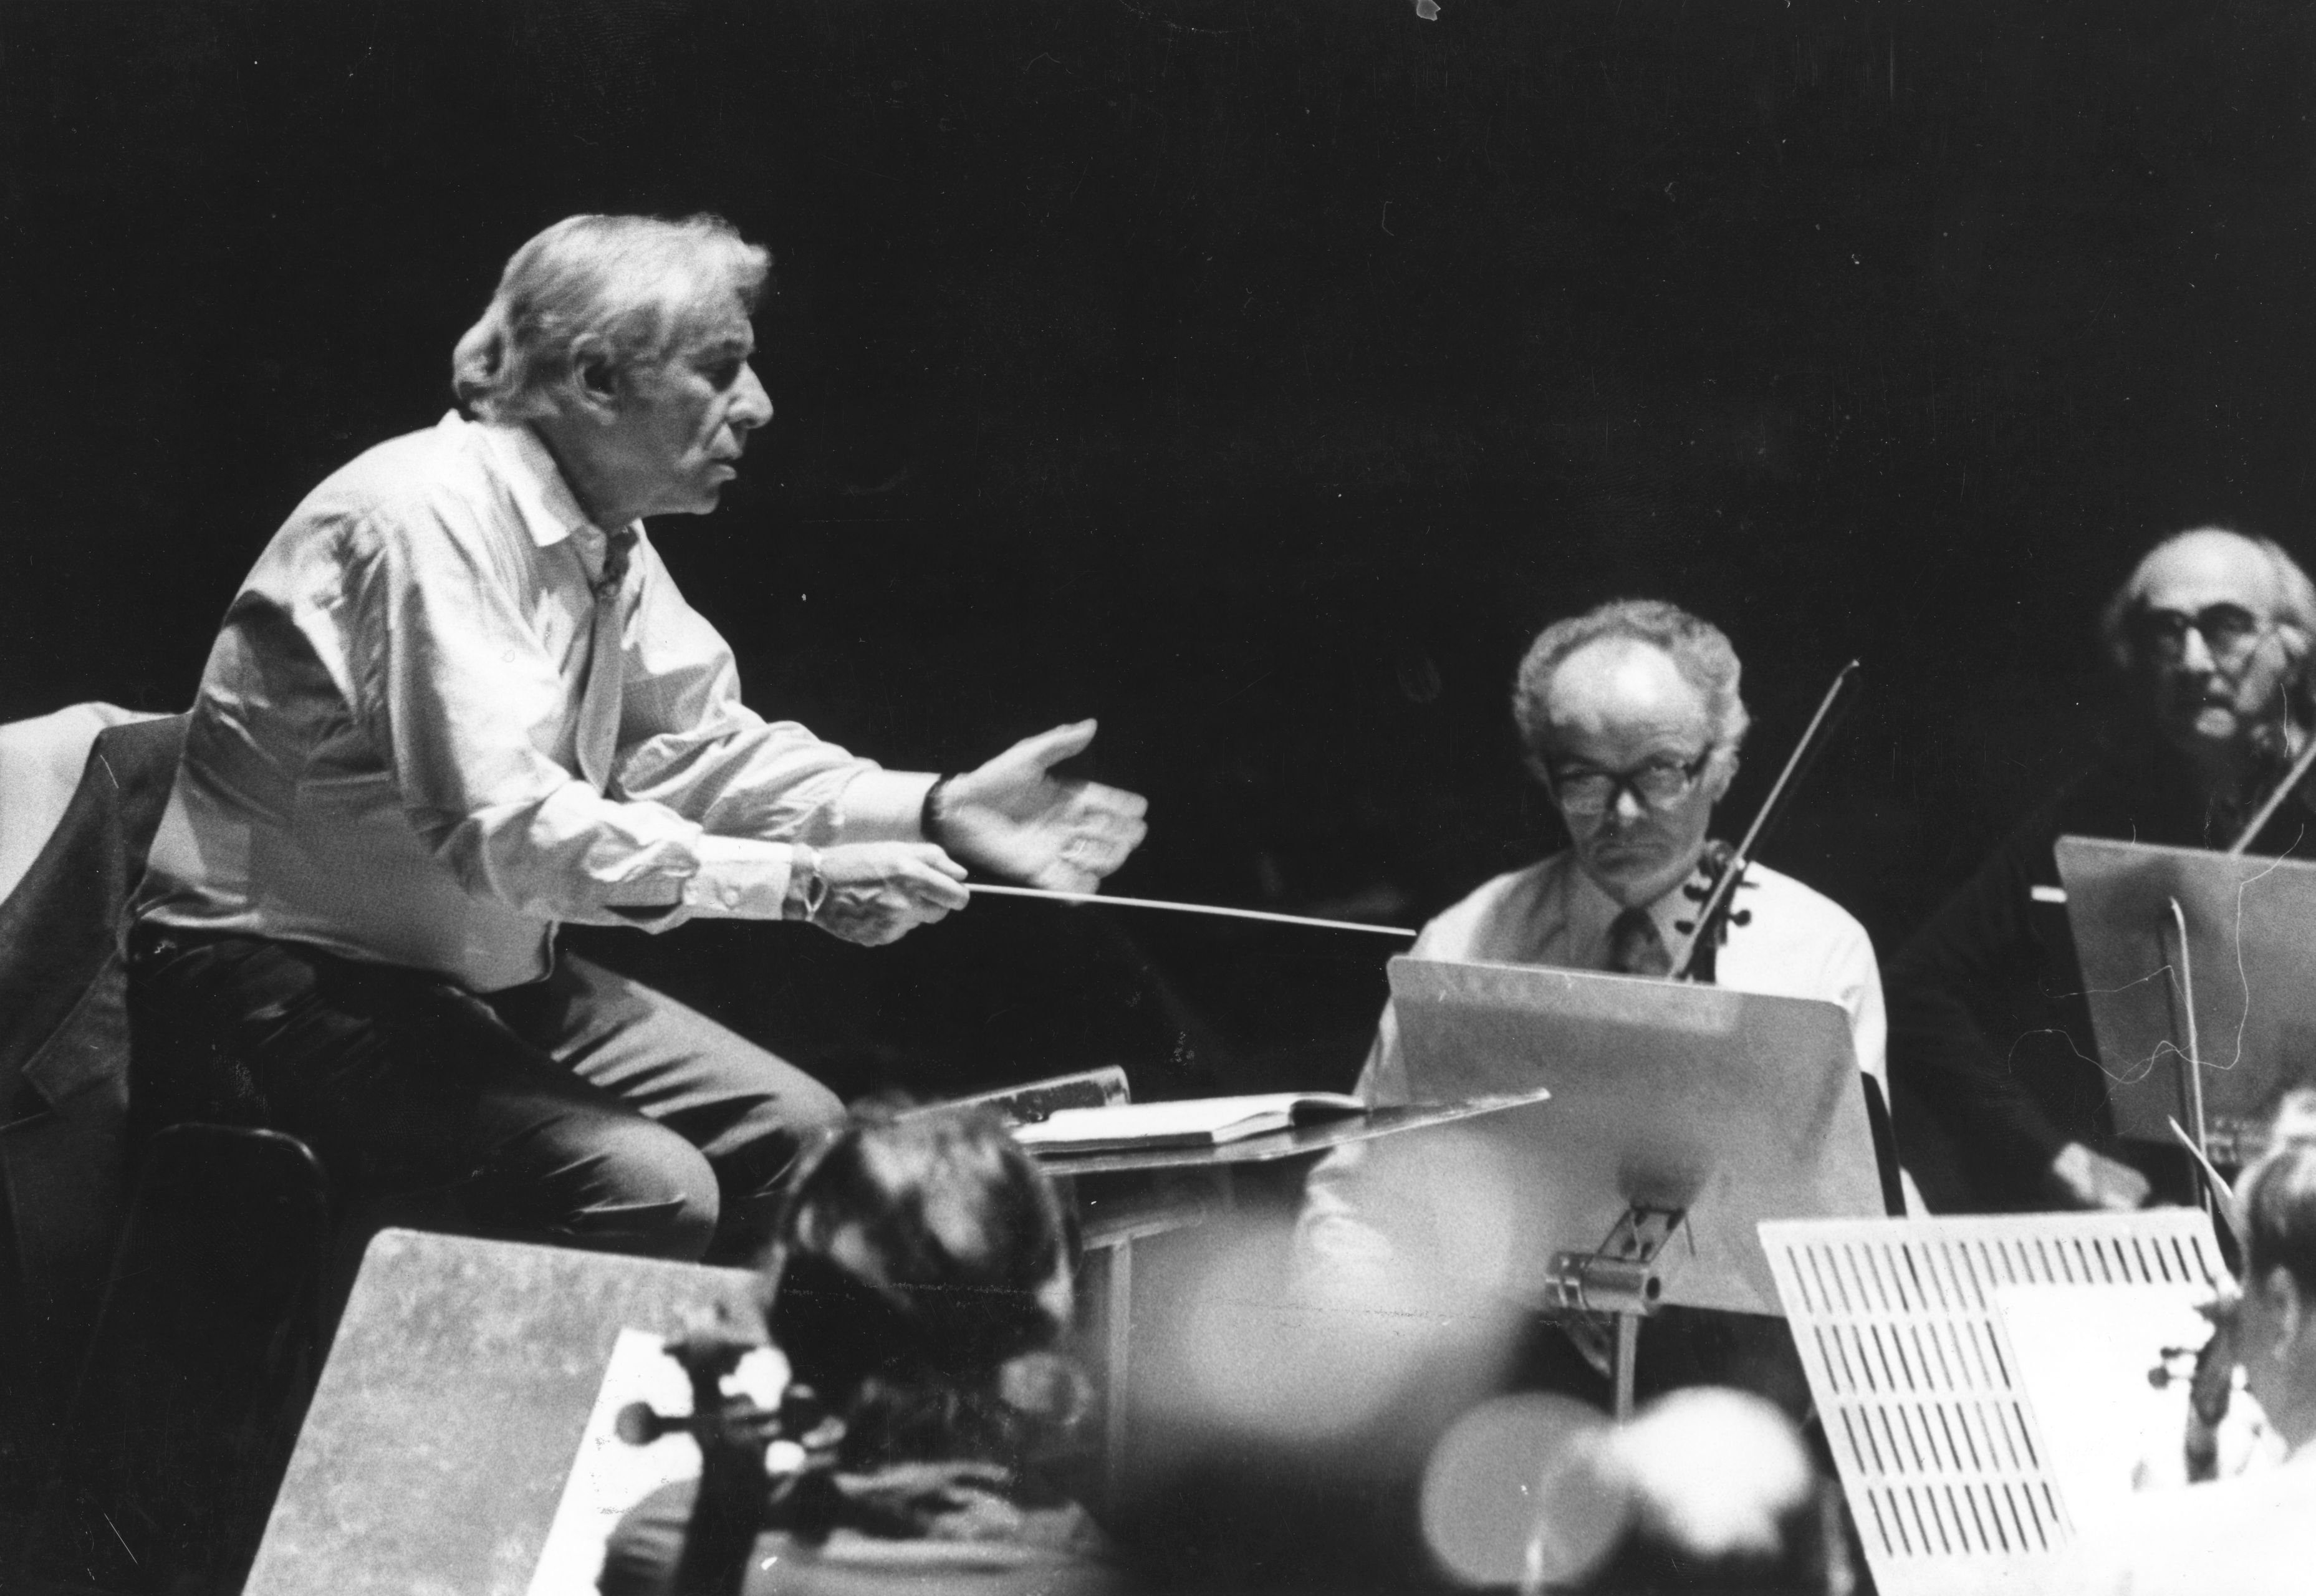 10th May 1979:  American composer, conductor and pianist Leonard Bernstein (1918 - 1990) conducting a rehearsal at the Royal Festival Hall, London.  (Photo by Argles/Evening Standard/Getty Images)